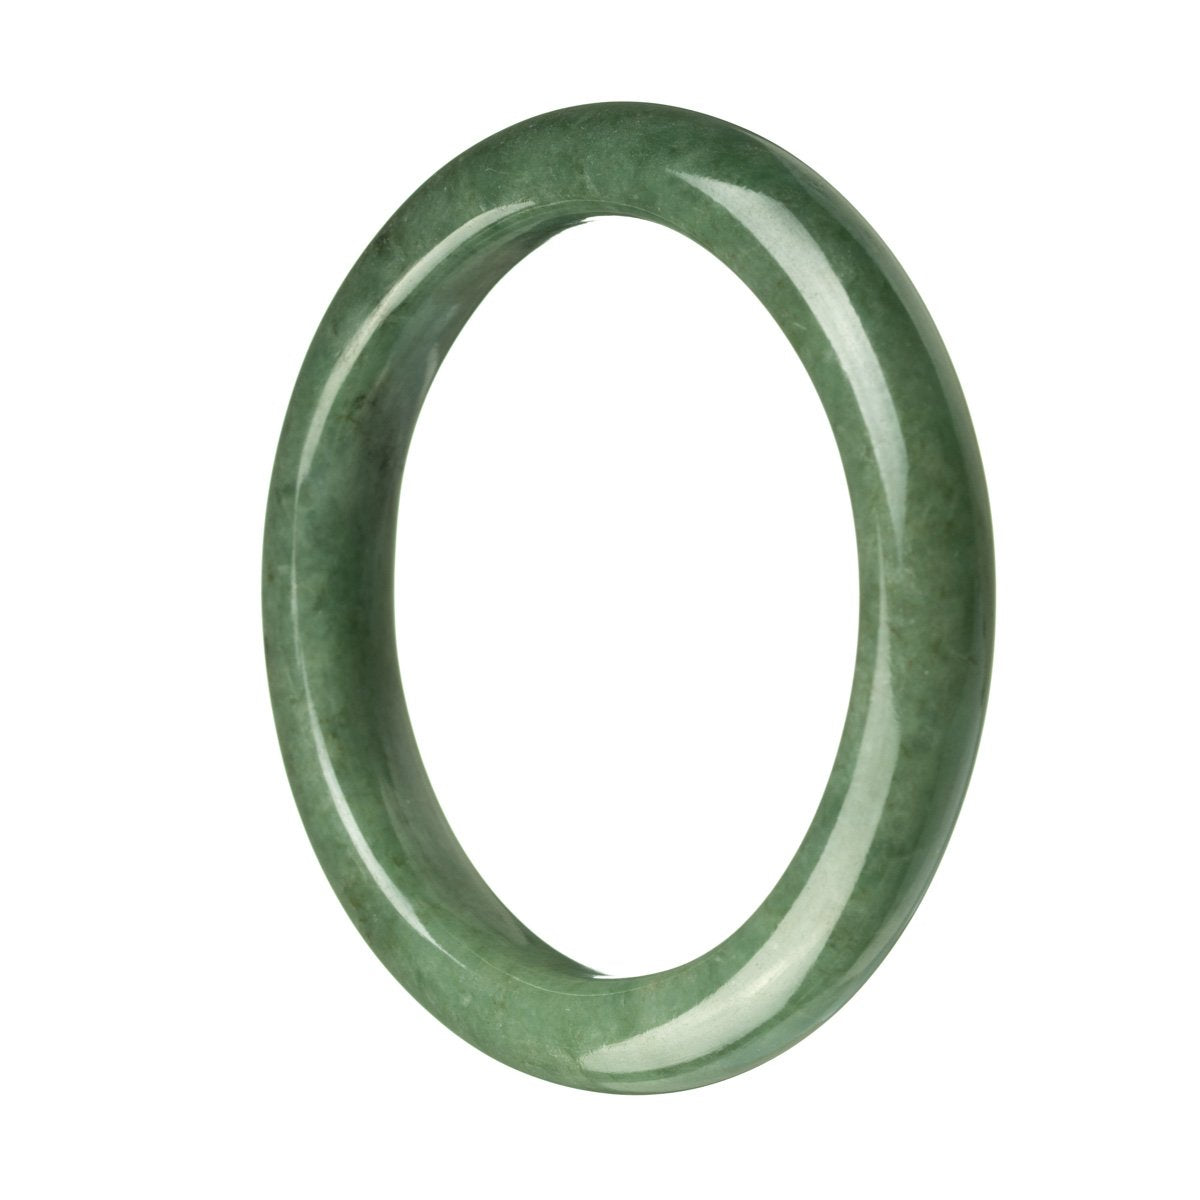 A close-up of a beautiful green jade bracelet with a semi-round shape, measuring 59mm in size. The bracelet is made from genuine grade A jade and is a stunning accessory from MAYS GEMS.